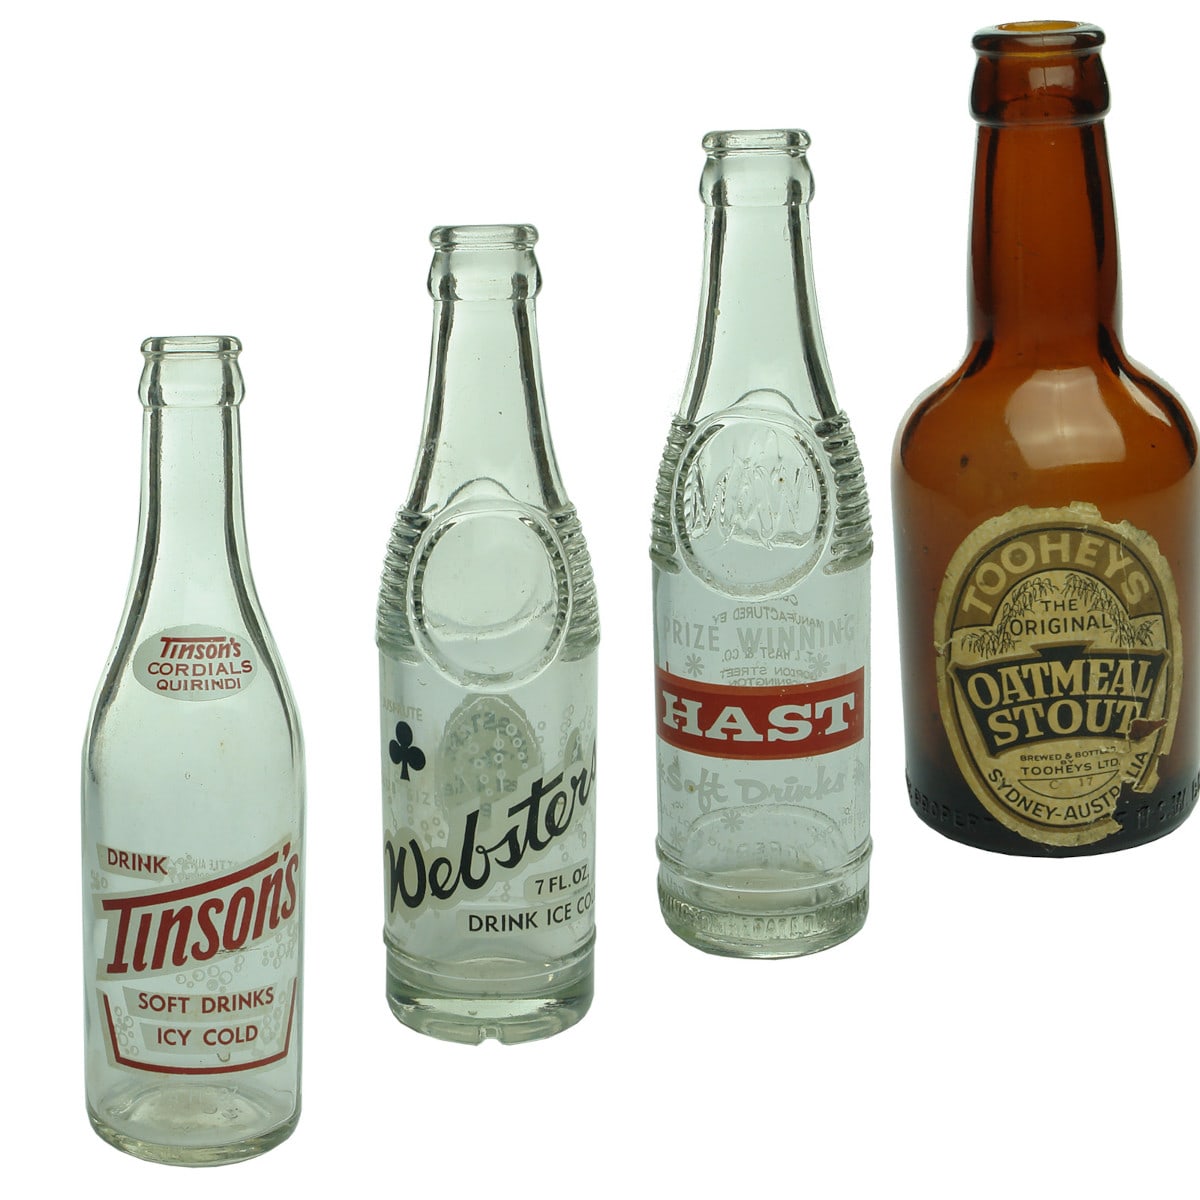 4 bottles. 3 x Ceramic Label Crown Seals & labelled beer: Tinson's Quirindi 10 oz; Websters Jusfrute 7 oz; Hast & Co., Mornington; Tooheys Oatmeal stout 4 oz. (New South Wales & Victoria)